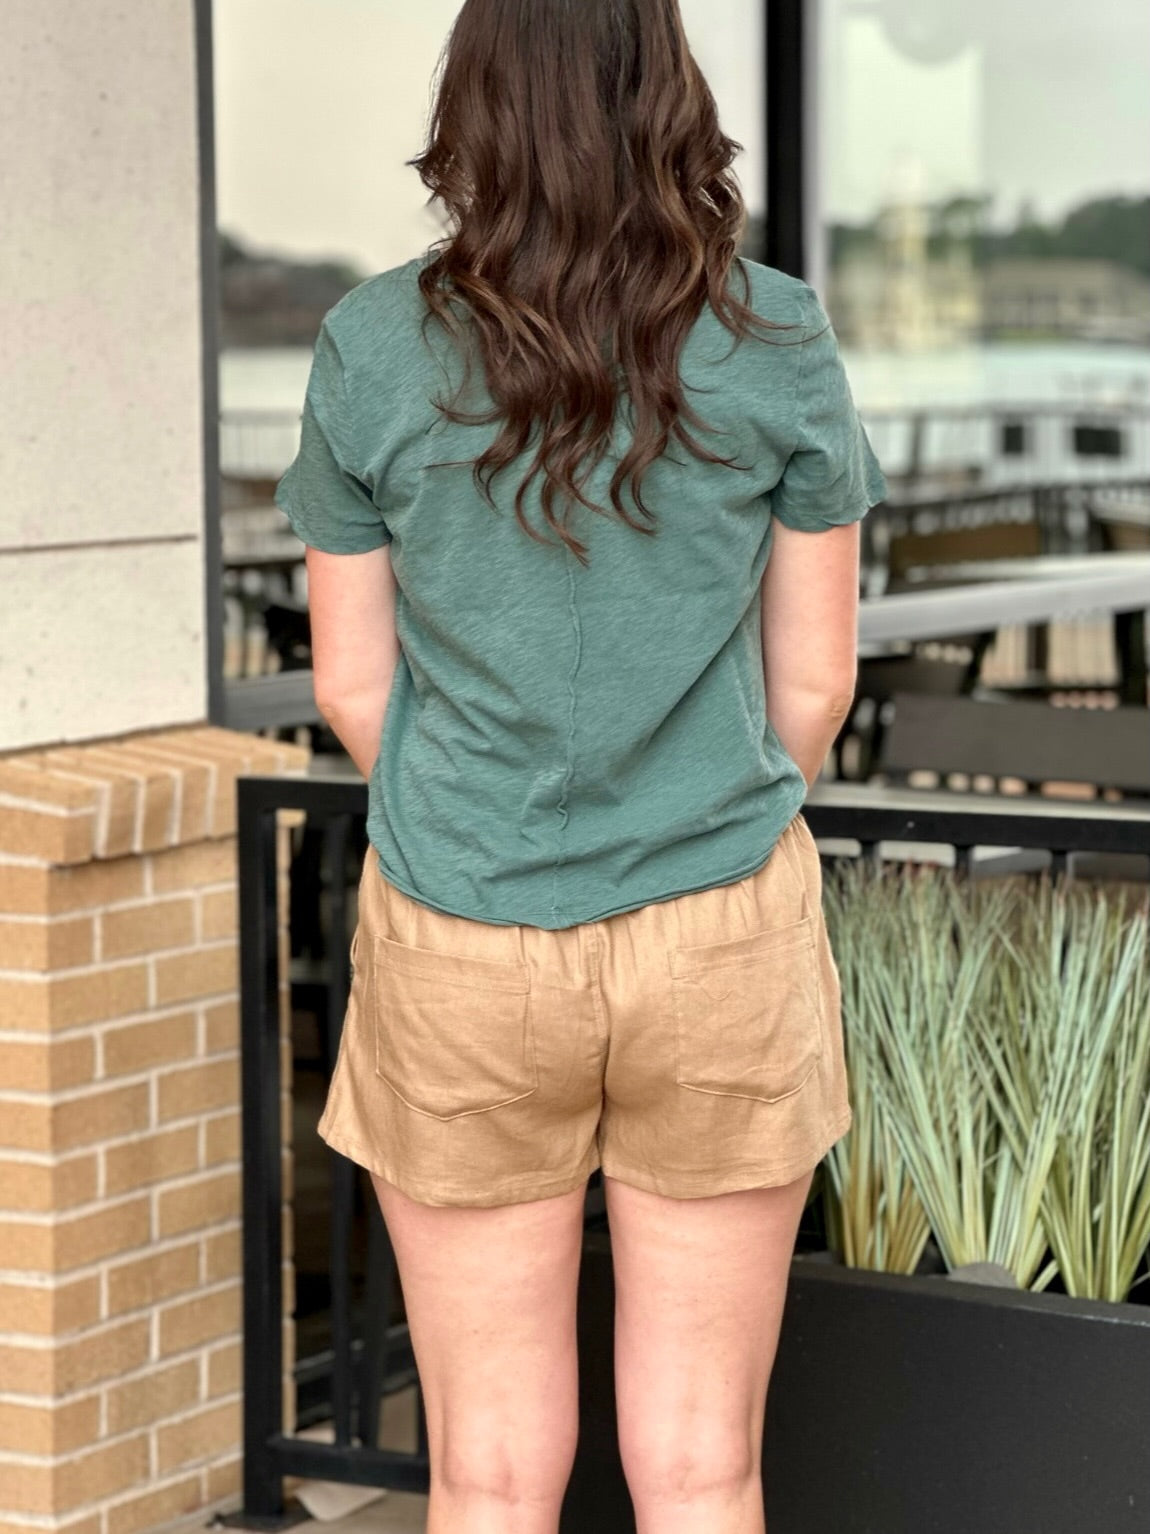 BACK VIEW OF MEGAN  IN SHORTS